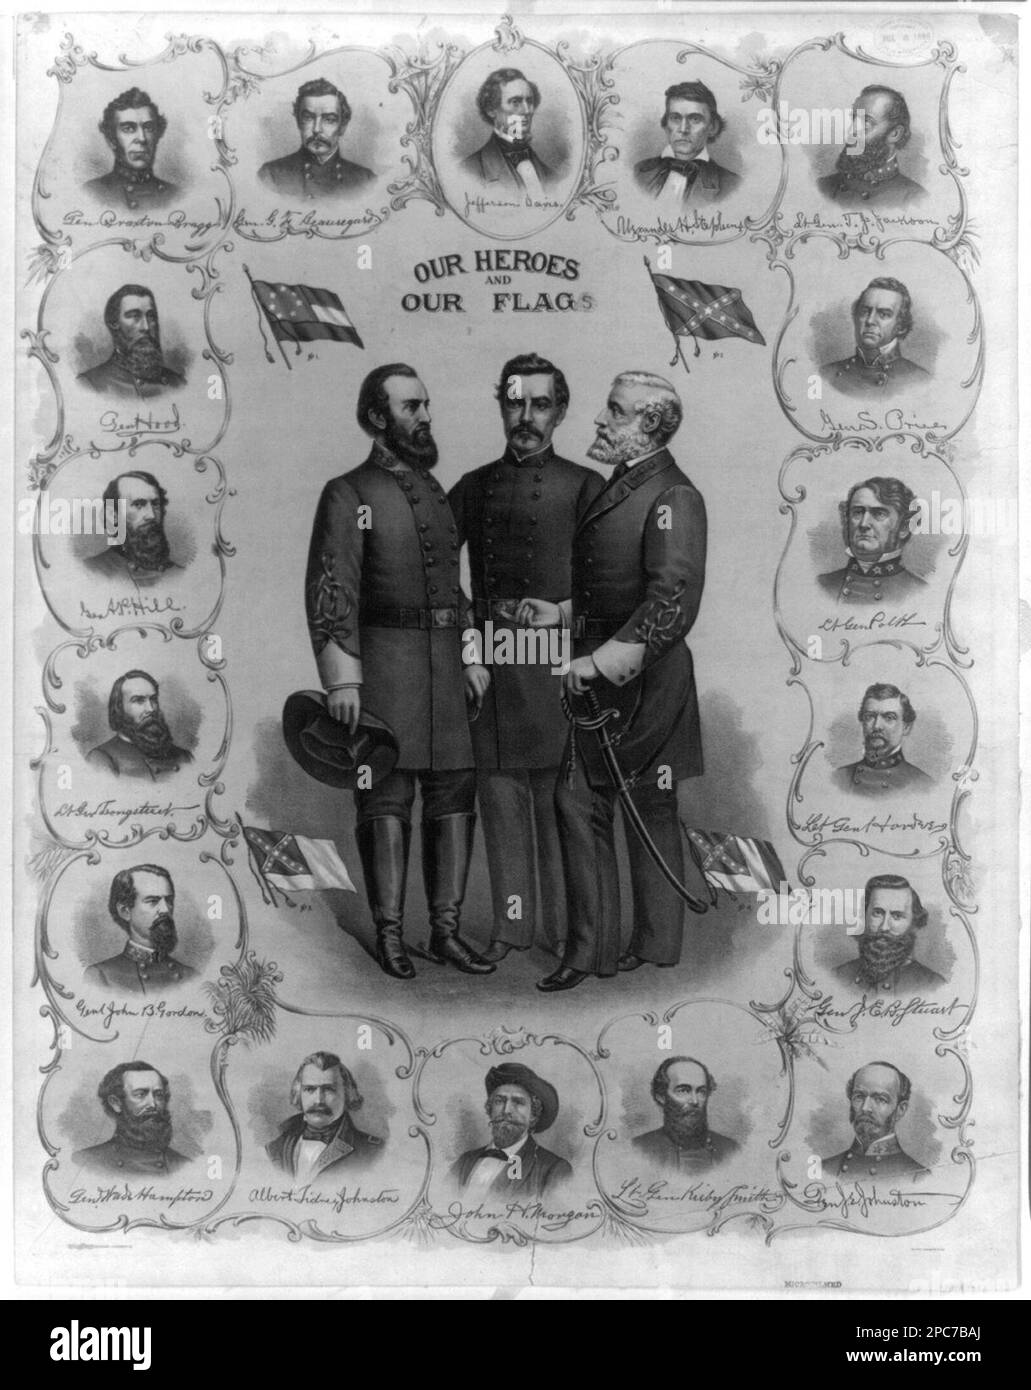 Our heroes and our flag. Title from item. Lee, Robert E, (Robert Edward), 1807-1870, Jackson, Stonewall, 1824-1863, Beauregard, G. T, (Gustave Toutant), 1818-1893, Military officers, Confederate, 1860-1870, Flags, Confederate, 1860-1870, United States, History, Civil War, 1861-1865, Military personnel, Confederate. Stock Photo